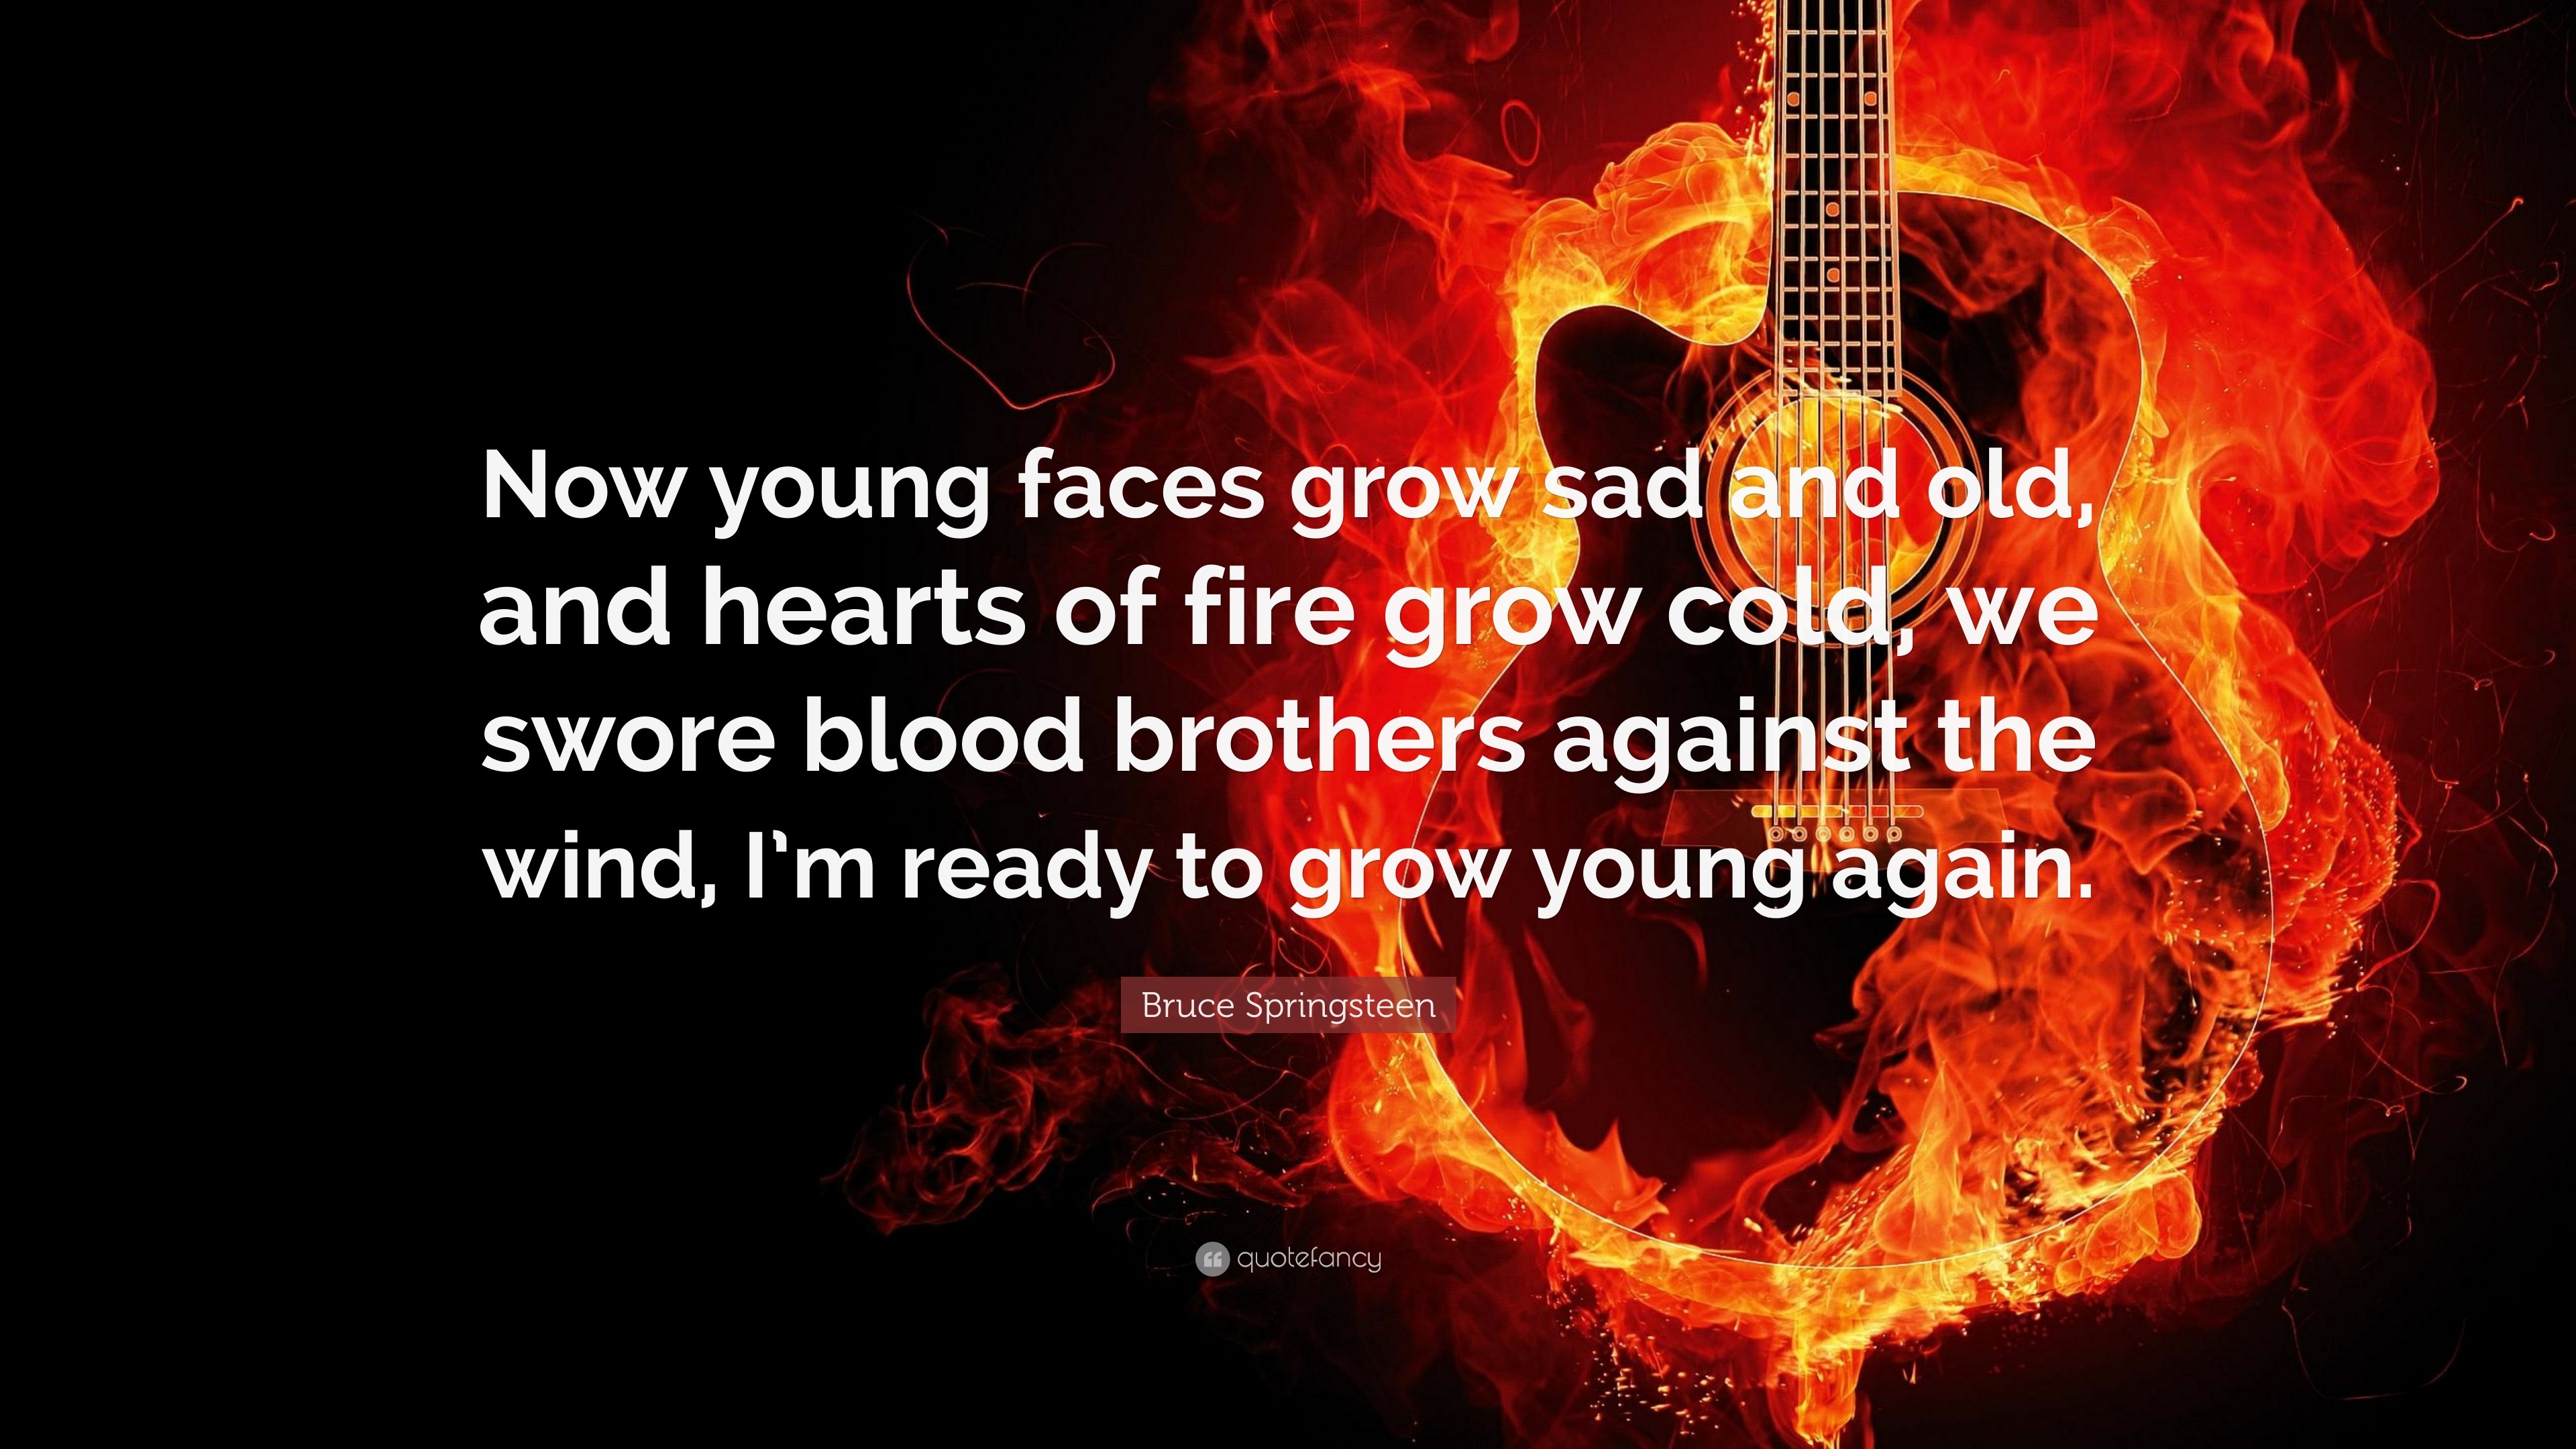 3840x2160 Bruce Springsteen Quote: “Now young faces grow sad and old, and hearts of